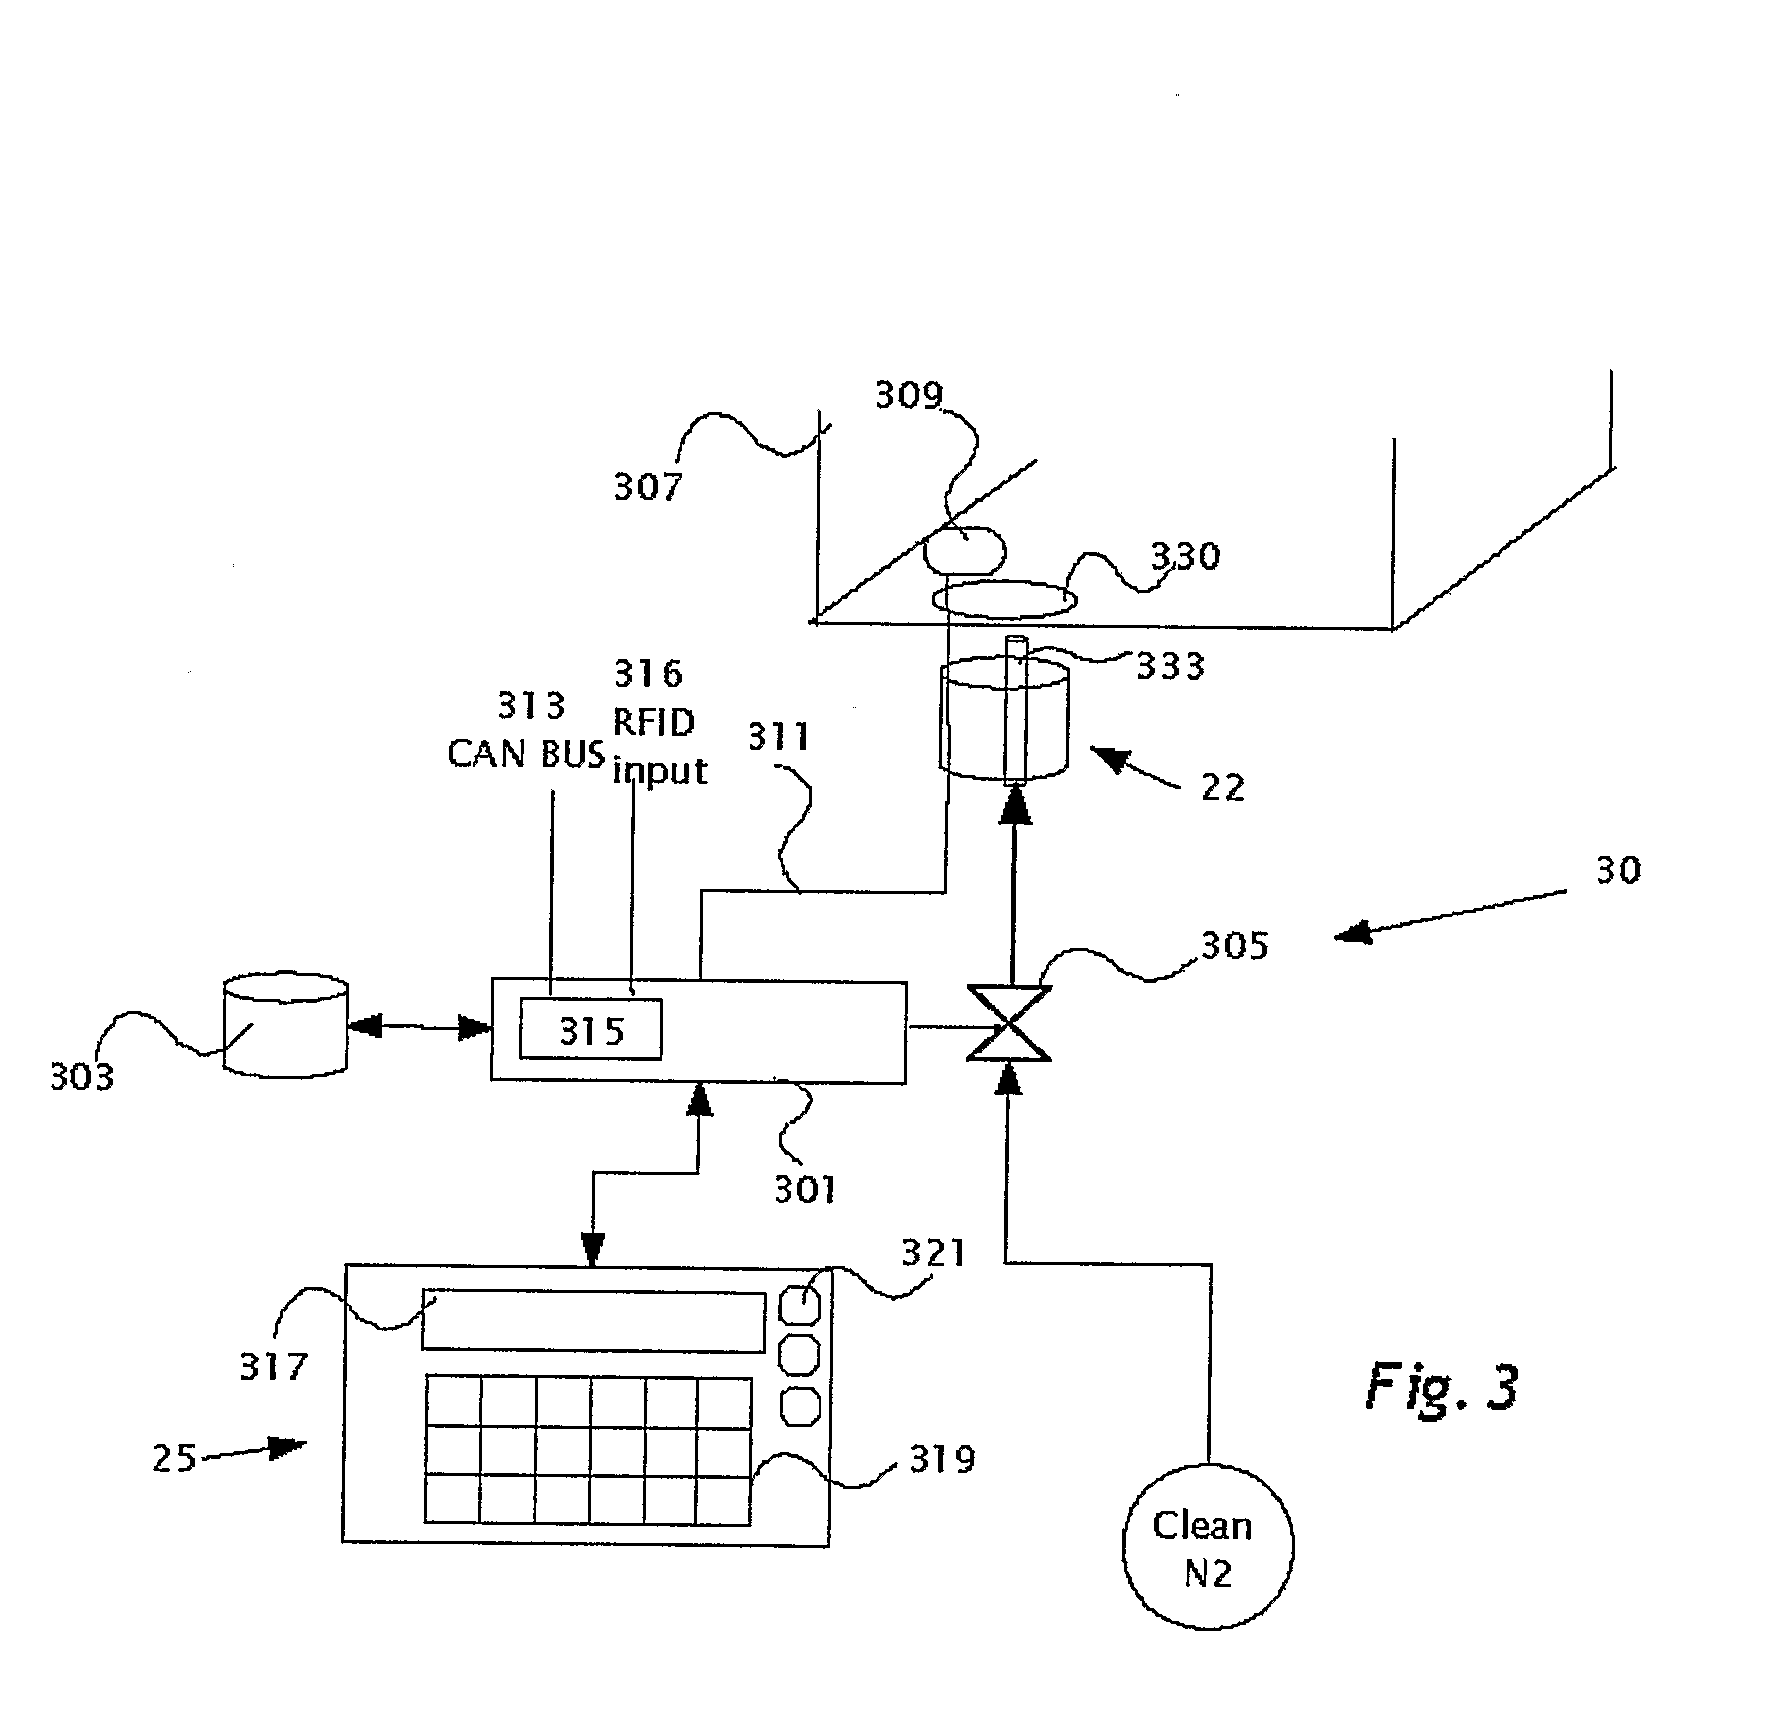 Storage and purge system for semiconductor wafers